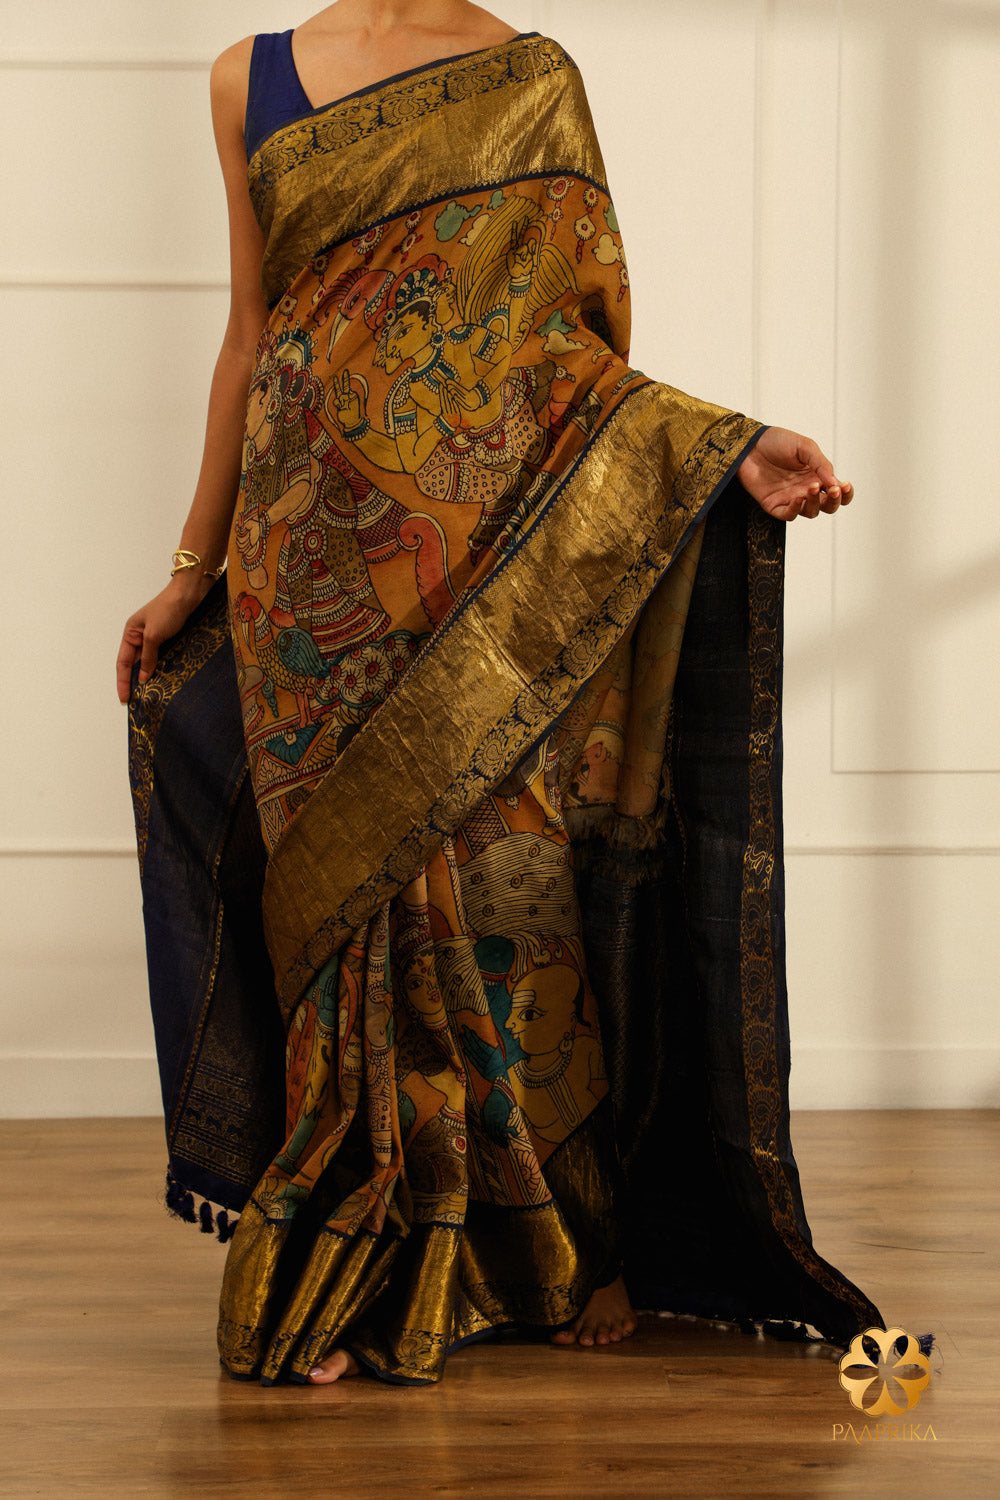  A close-up of the saree's border, showcasing the woven peacocks in a rich navy blue color, adding elegance and symbolism.